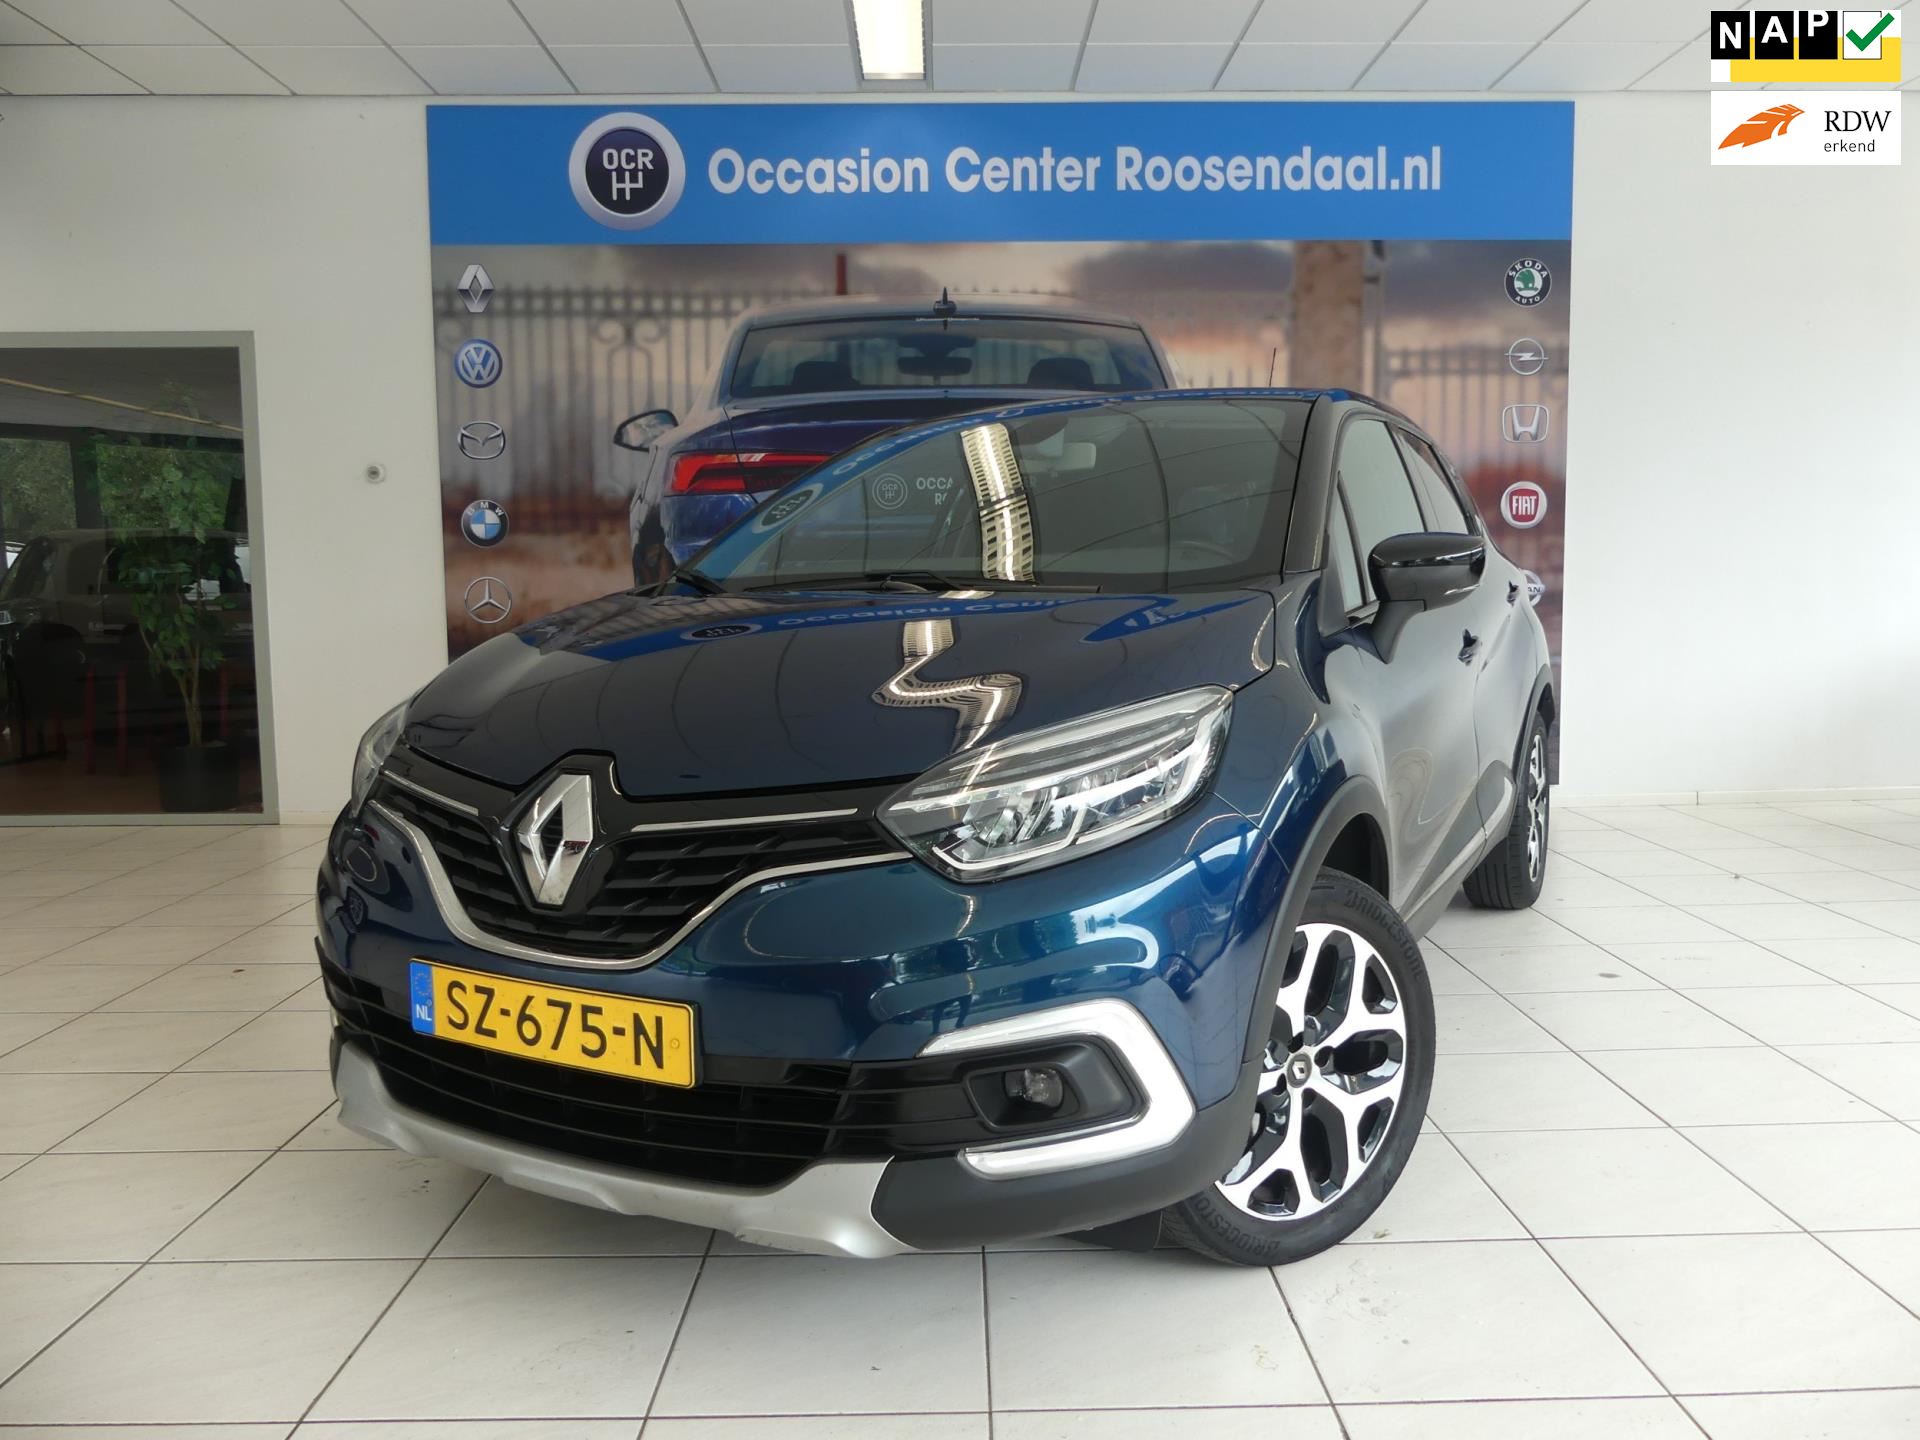 Renault Captur occasion - Occasion Center Roosendaal